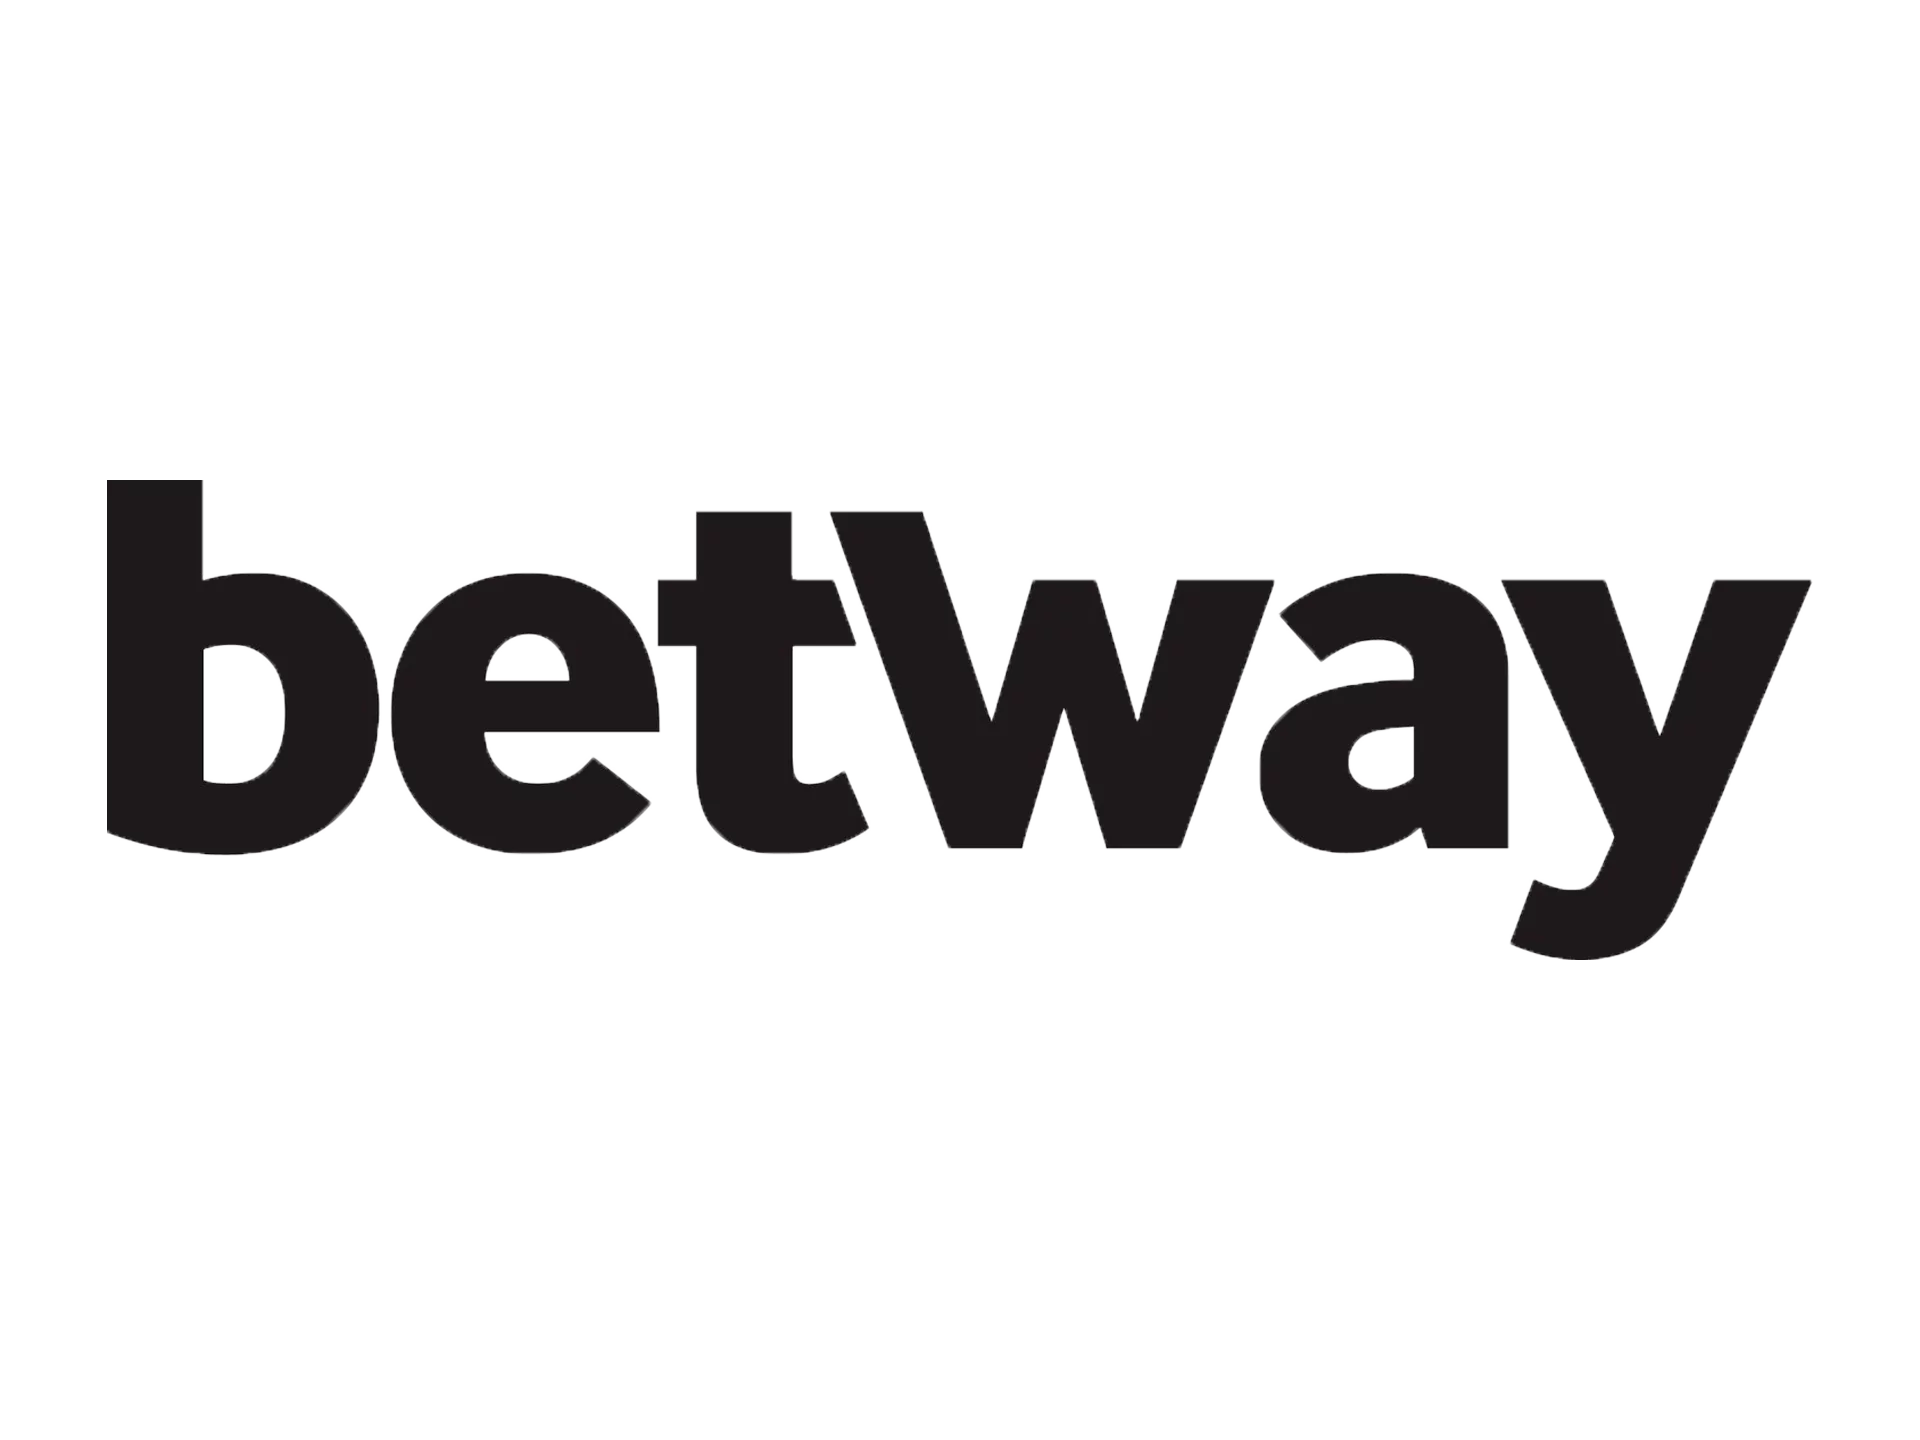 Watch the video review of the Betway mobile app for Android and iOS.